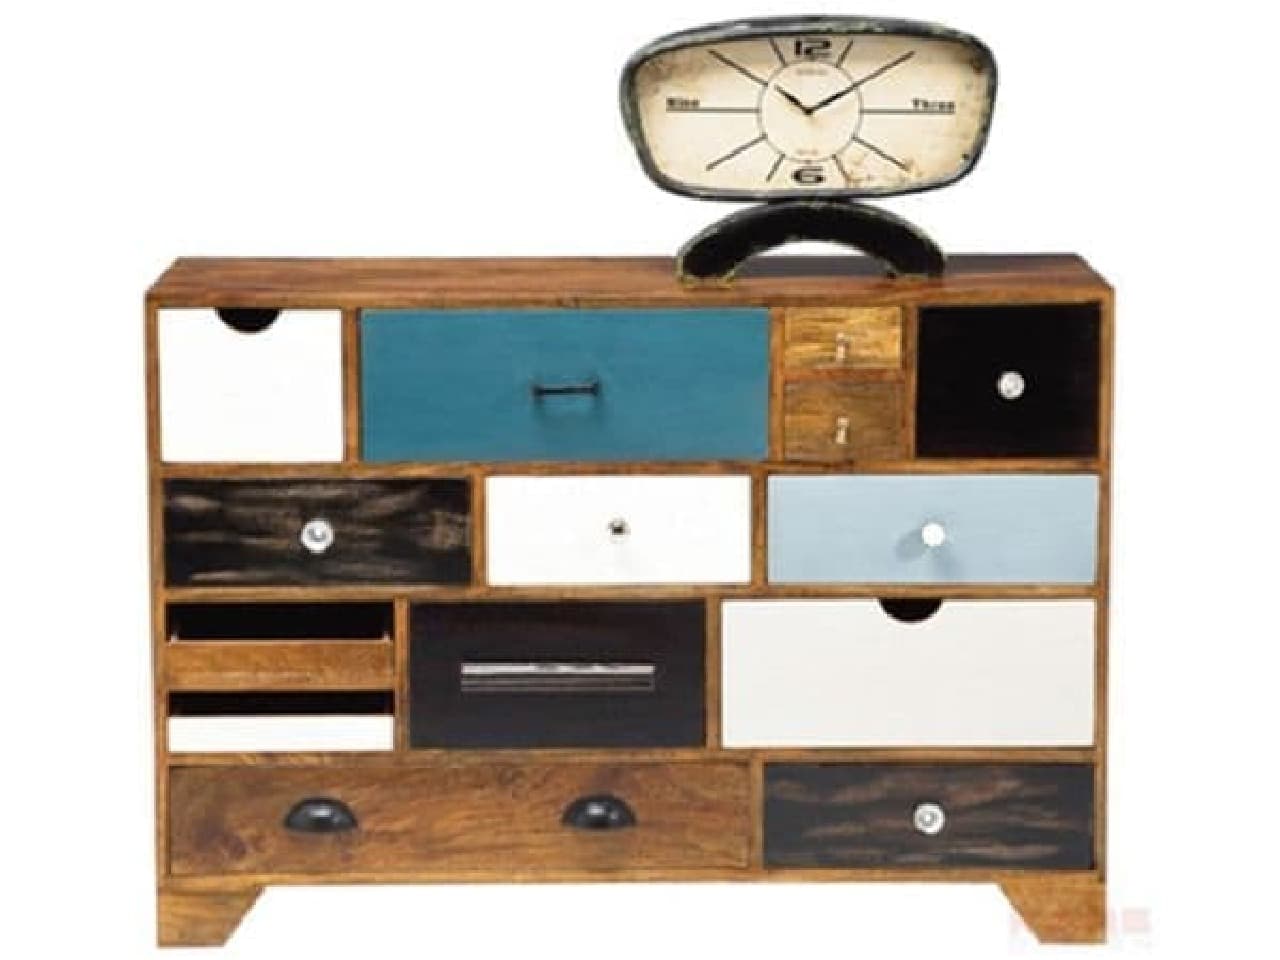 "Dresser Babalou EU 14 Drawer" featuring mixed color drawers